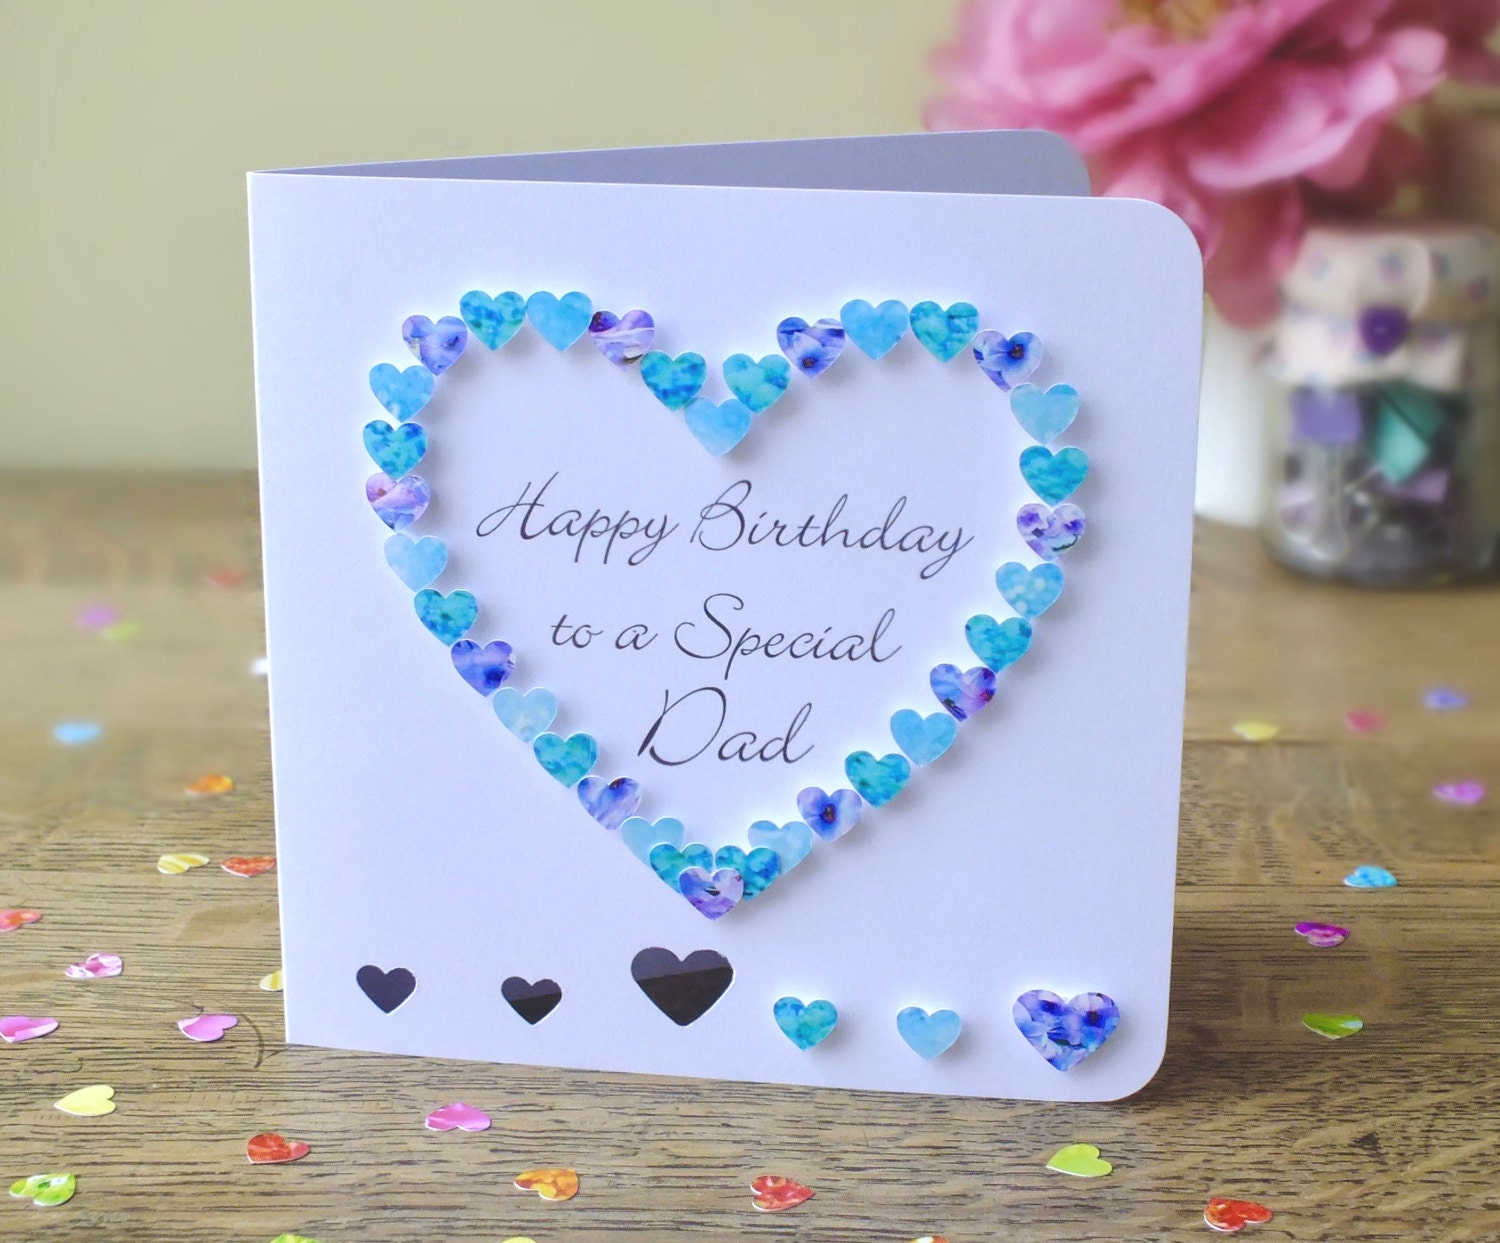 How To Make A Simple Birthday Card For Father